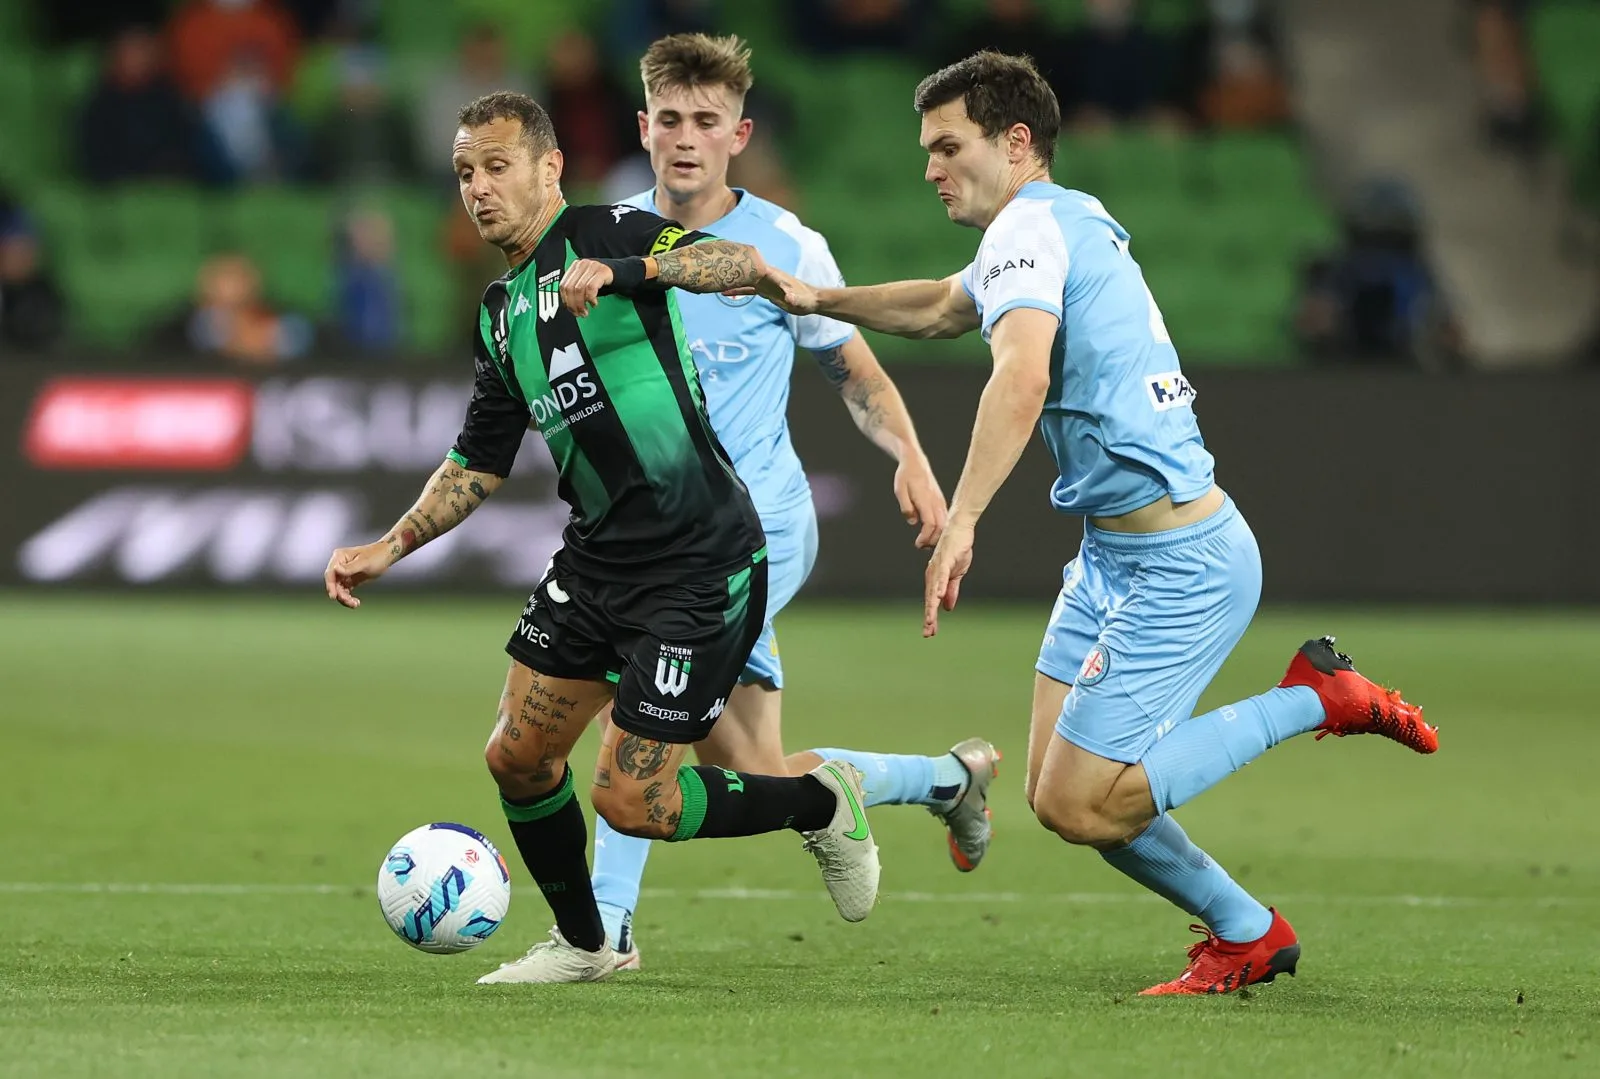 How To Watch The 2022/23 A-League In Australia